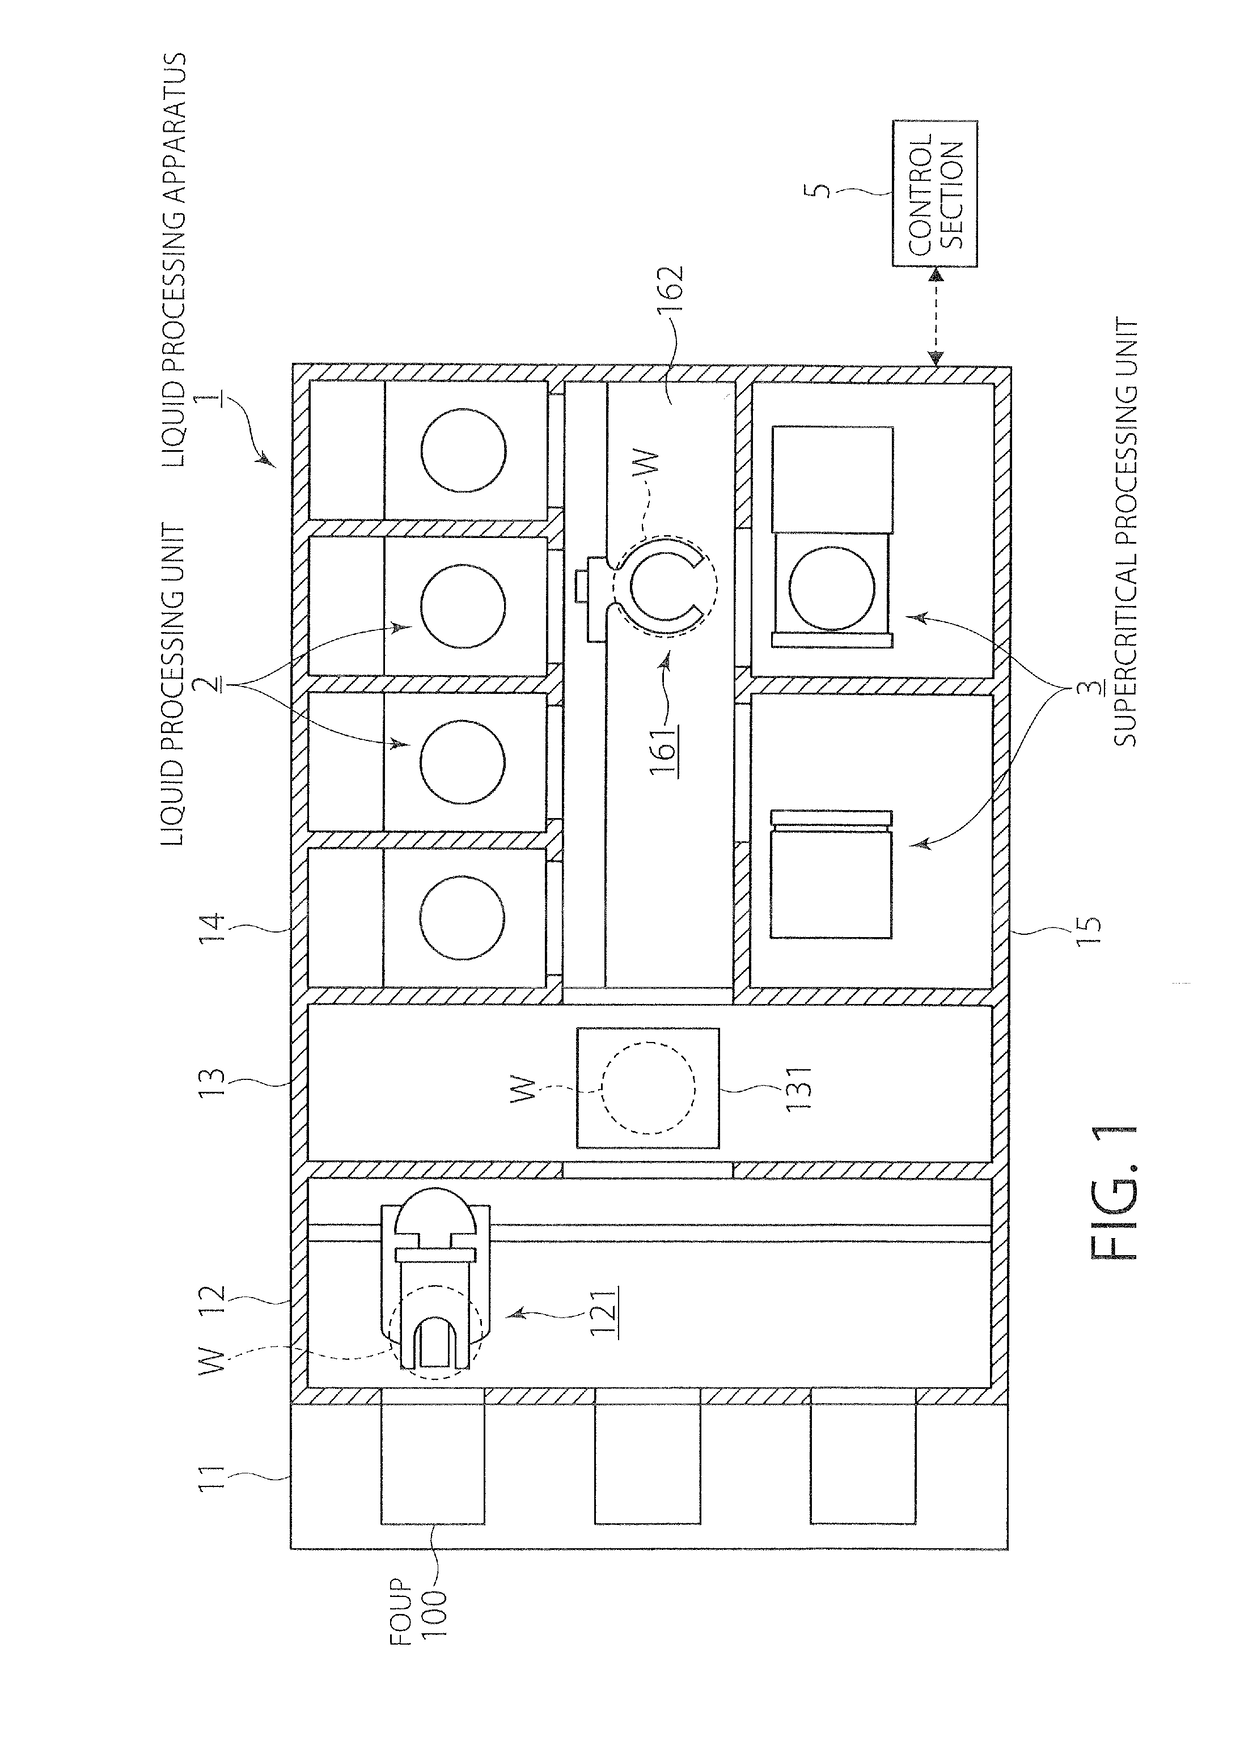 Substrate processing method and storage medium